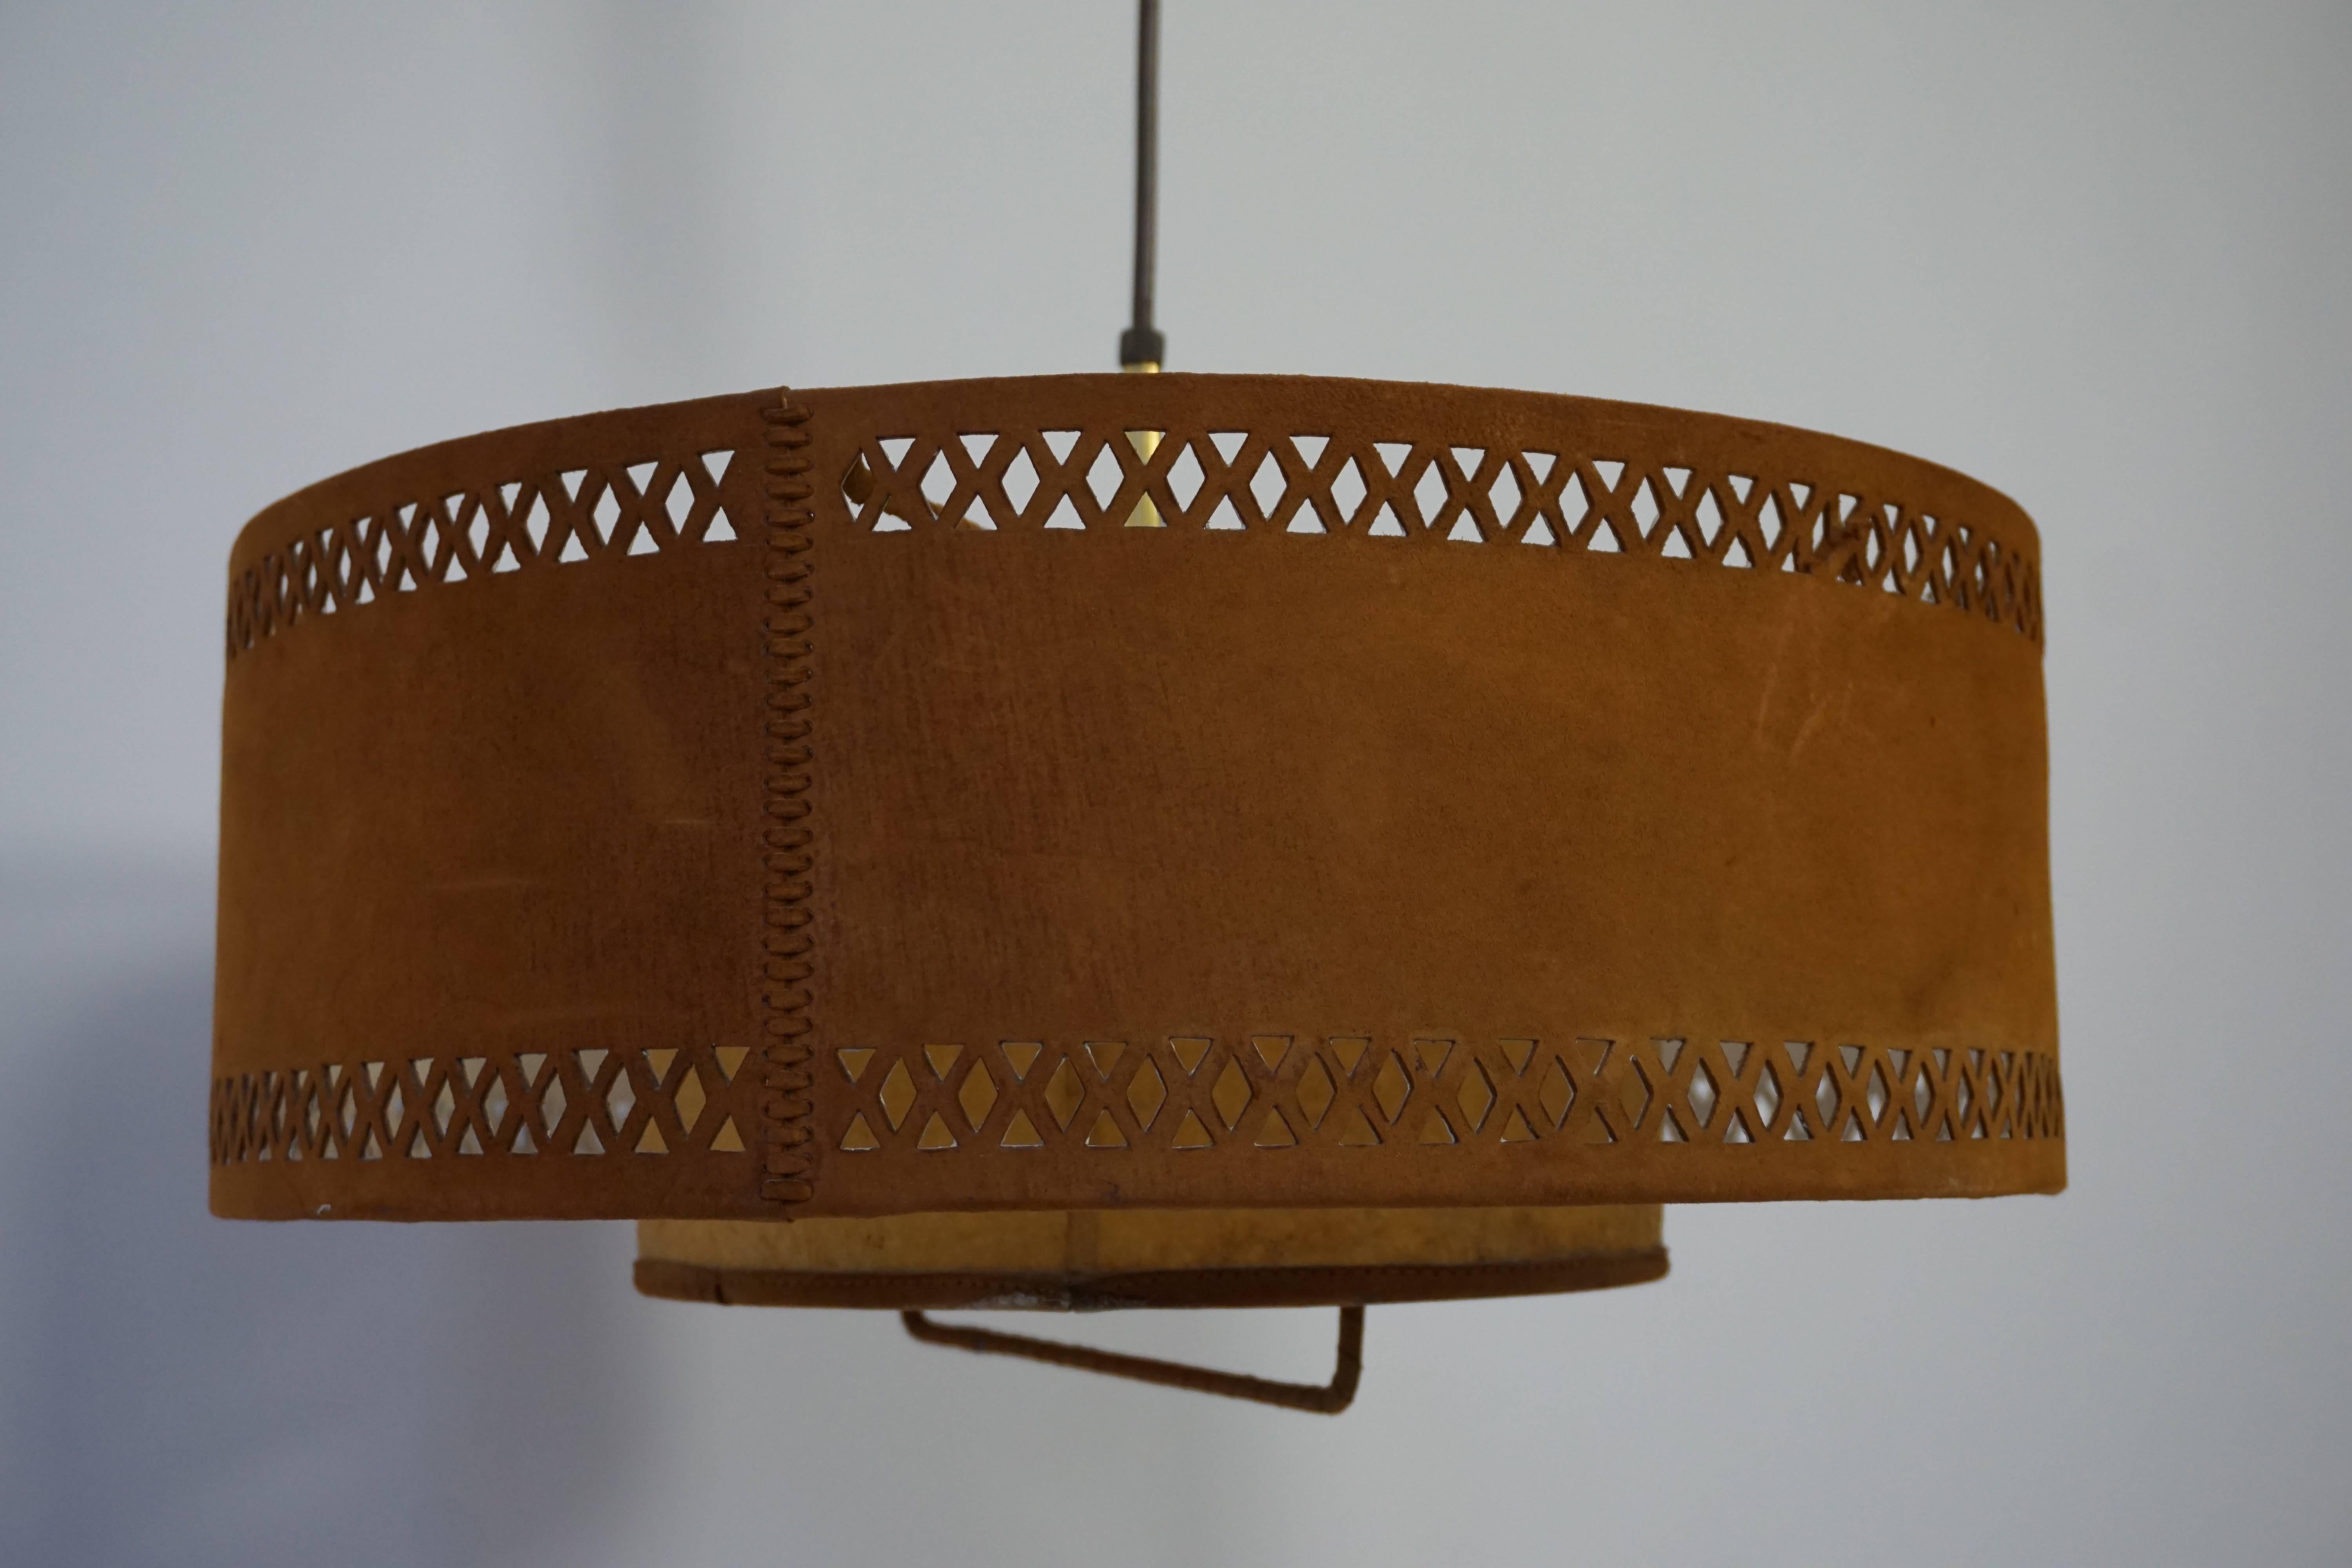 20th Century Rare Adjustable Ceiling Light in Brass and Suede